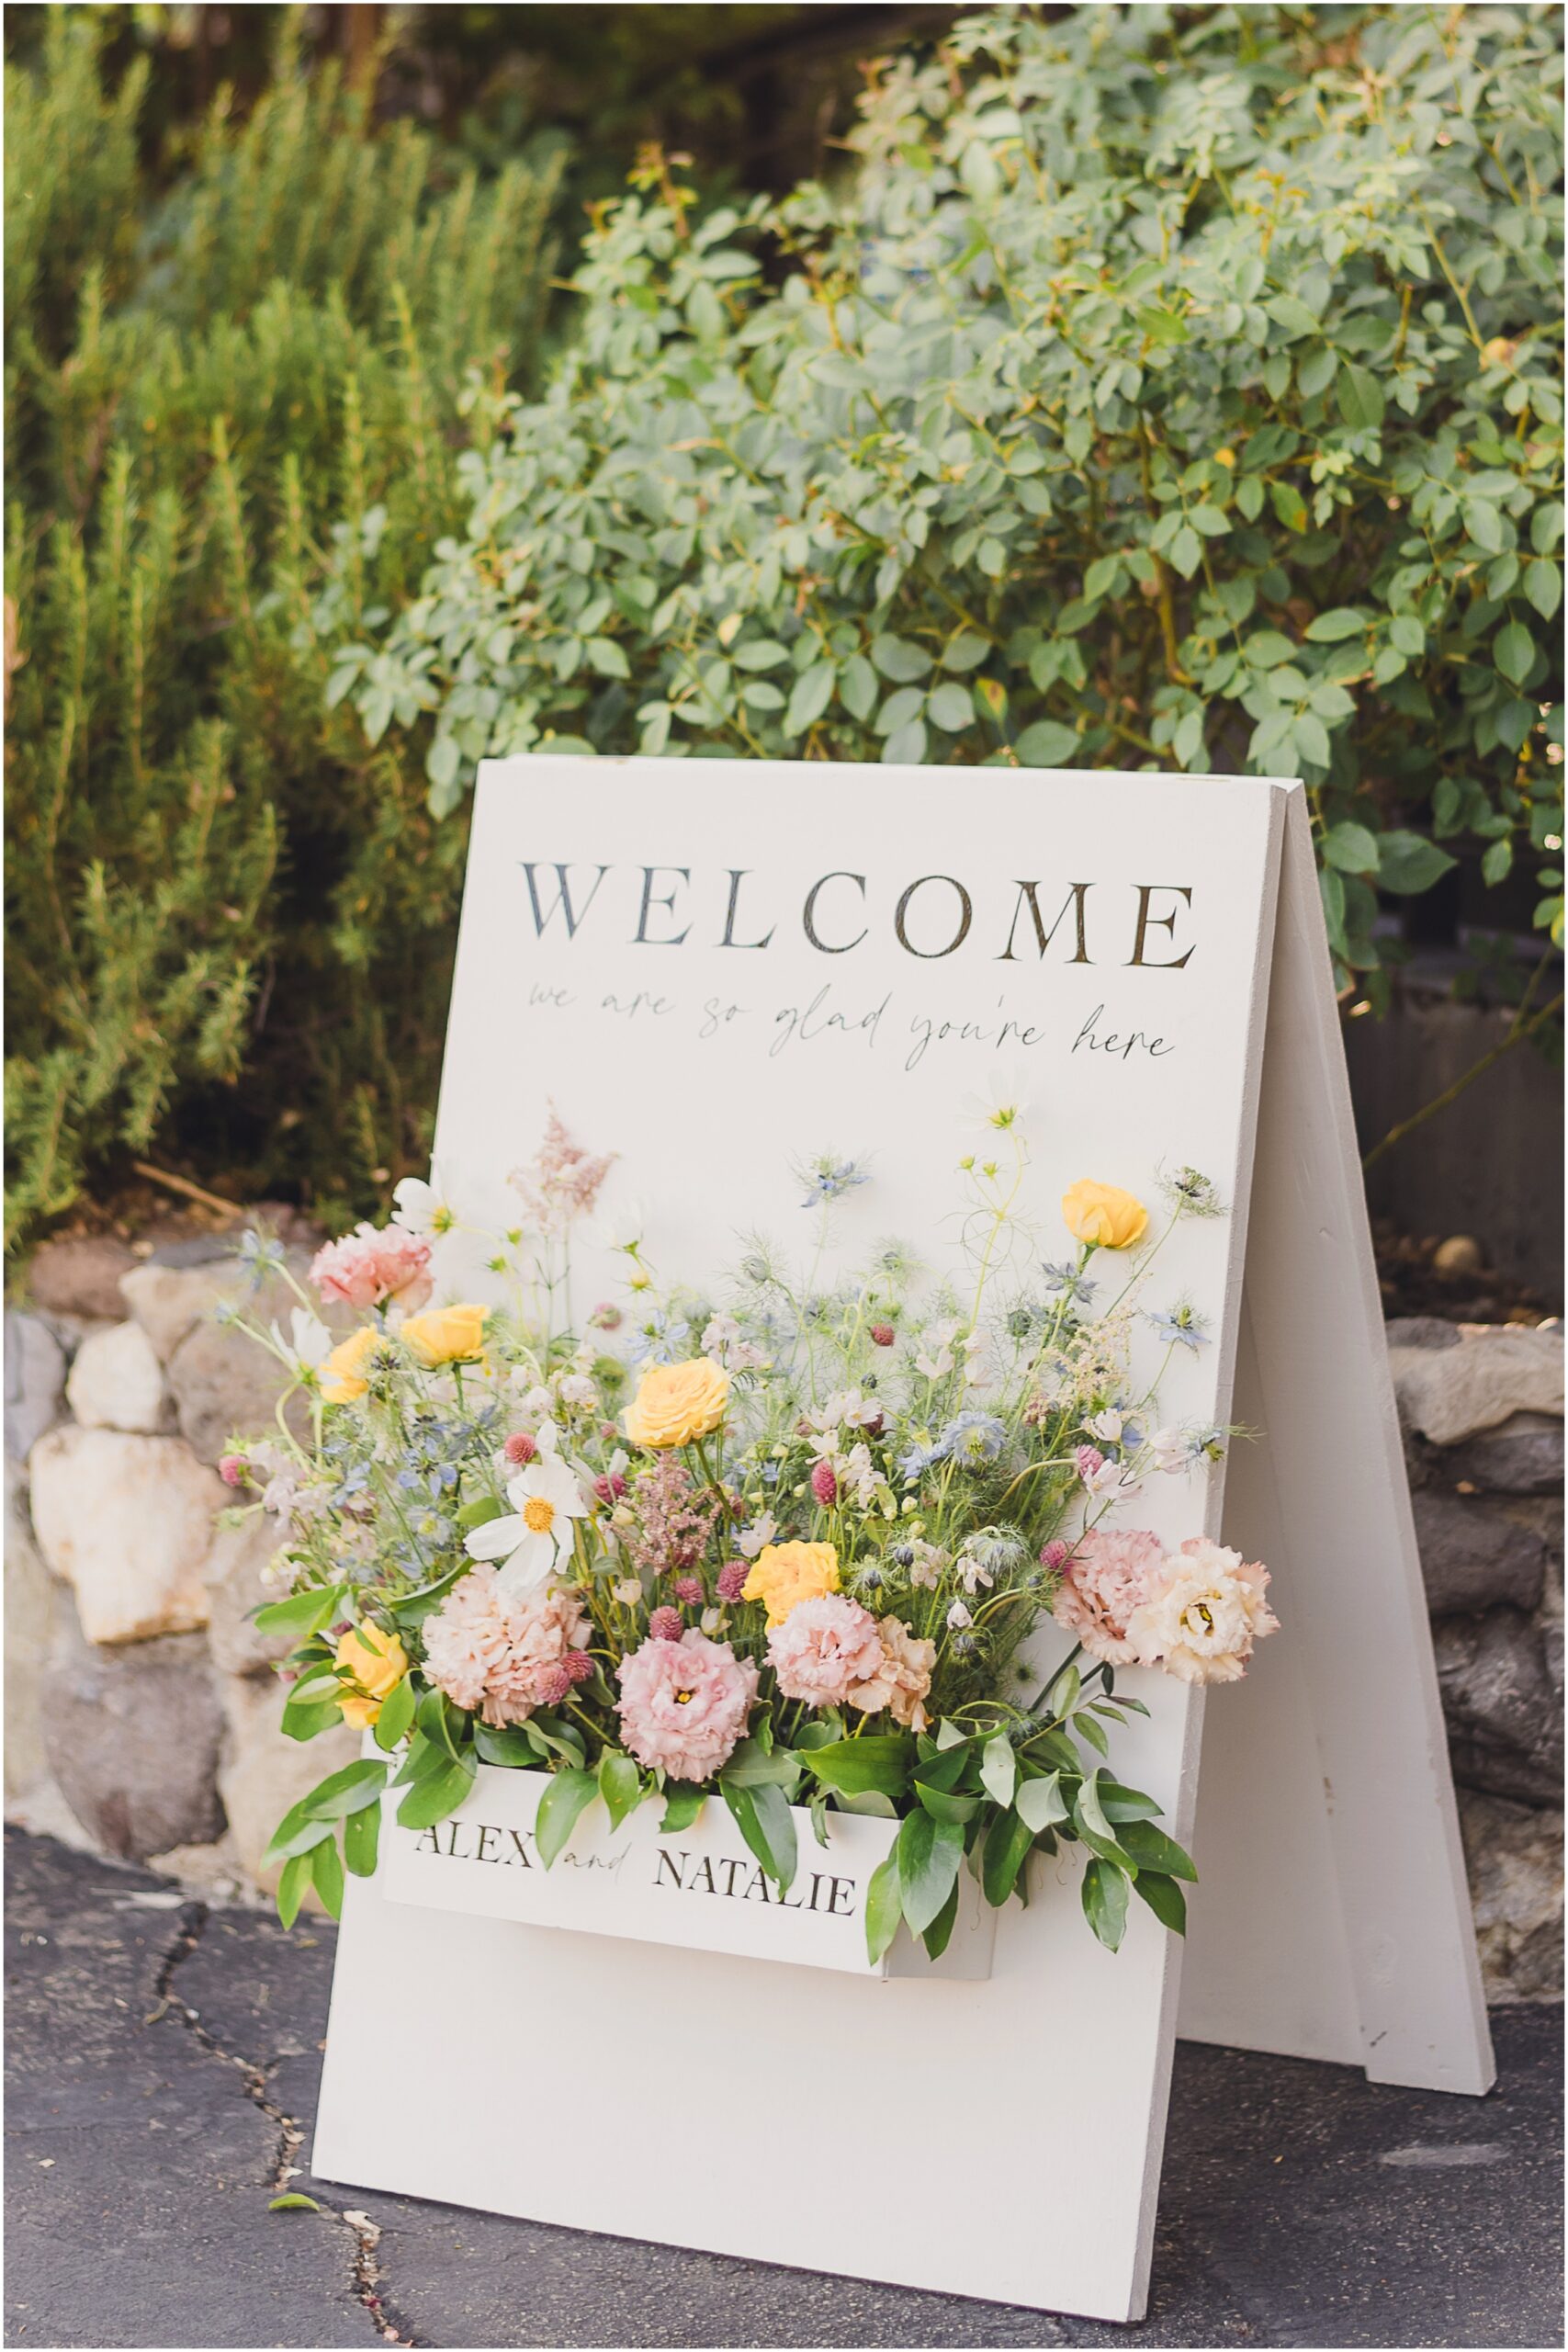 A welcome sign greets people entering Alex and Natalie's wedding at the lodge at Malibou Lake in Southern California. The sign is adorned with colorful and tasteful flower arrangements